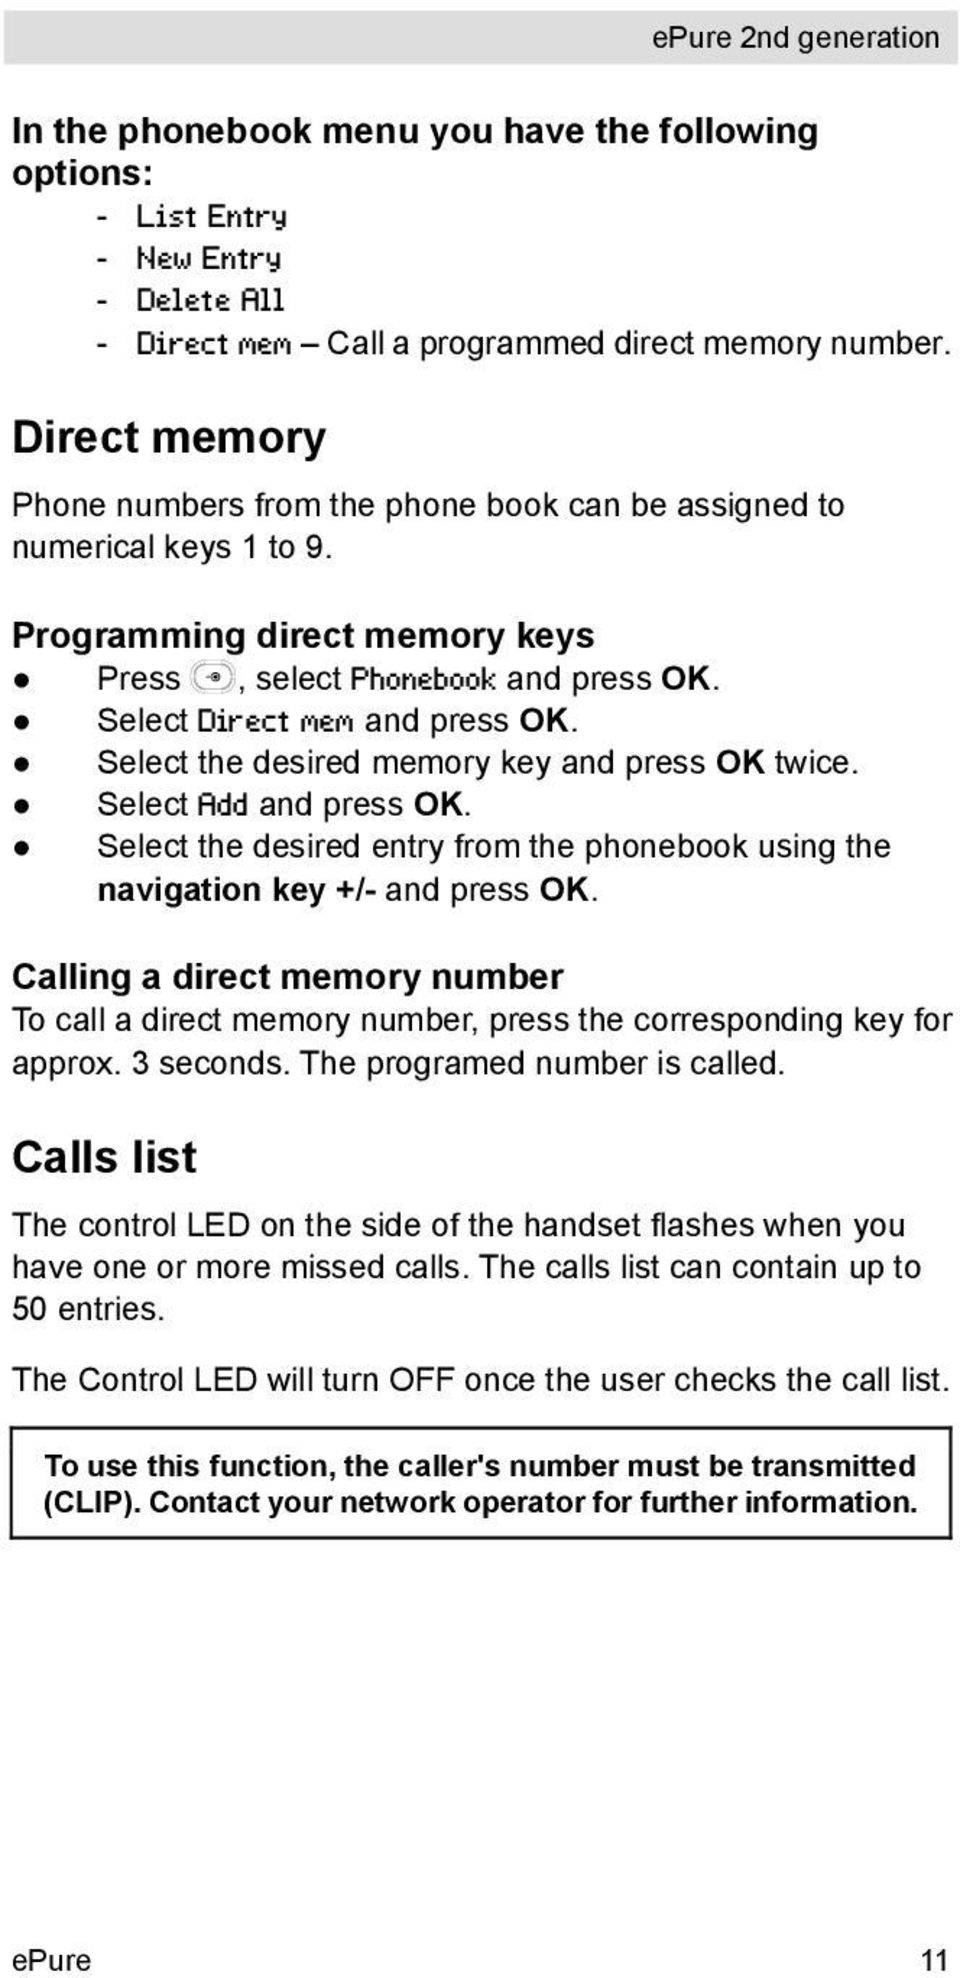 Select the desired memory key and press OK twice. Select Add and press OK. Select the desired entry from the phonebook using the navigation key +/- and press OK.